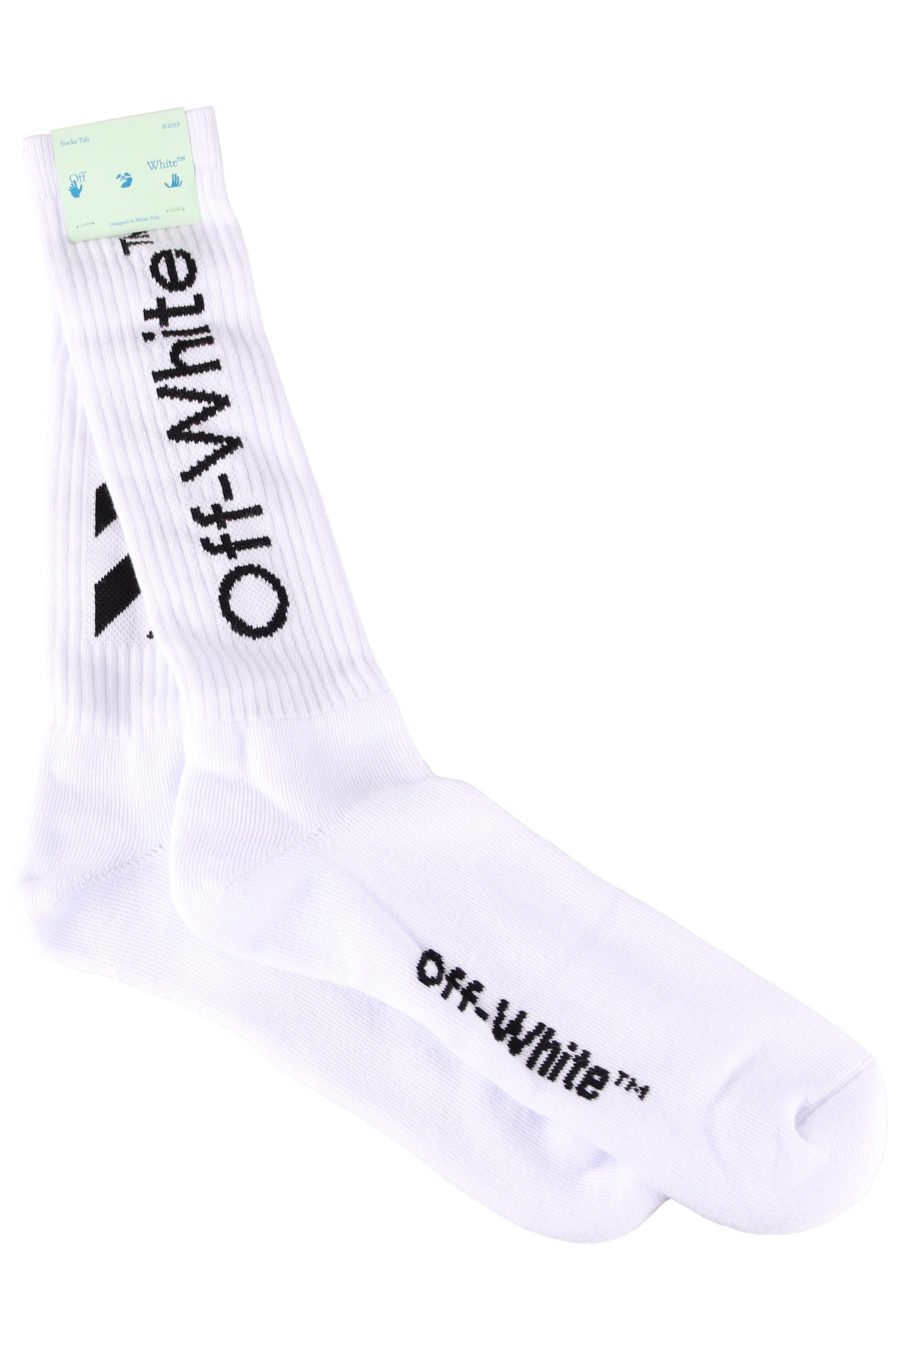 Calcetines Off-White blancos con rayas negras - bfc43a53f0db61a19713258f09c9d6598d19f896